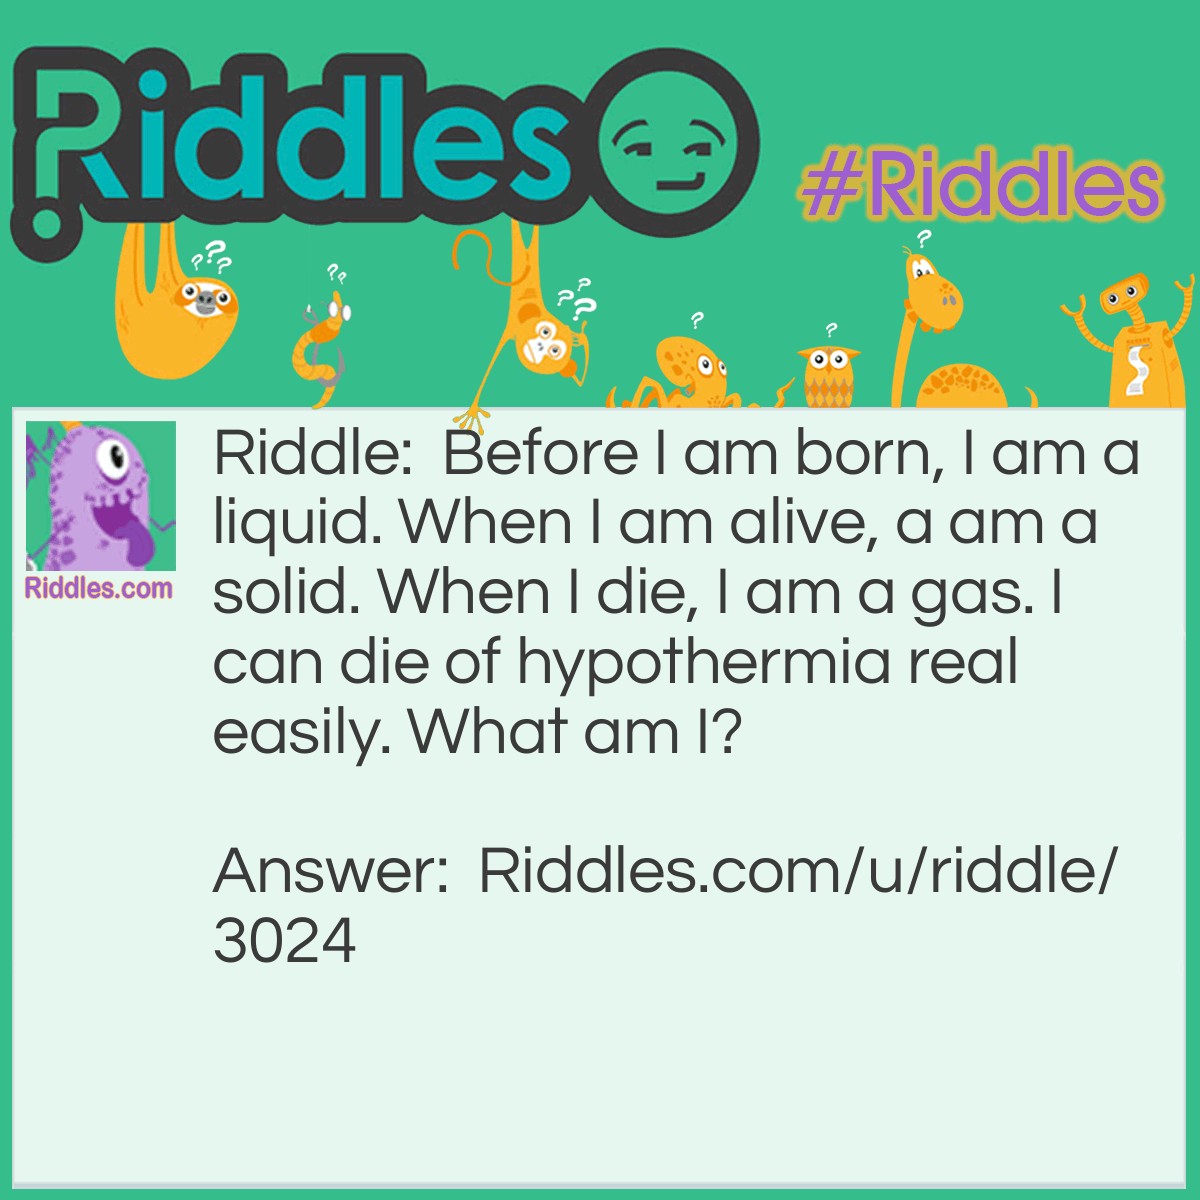 Riddle: Before I am born, I am a liquid. When I am alive, a am a solid. When I die, I am a gas. I can die of hypothermia real easily. What am I? Answer: A Bubble.